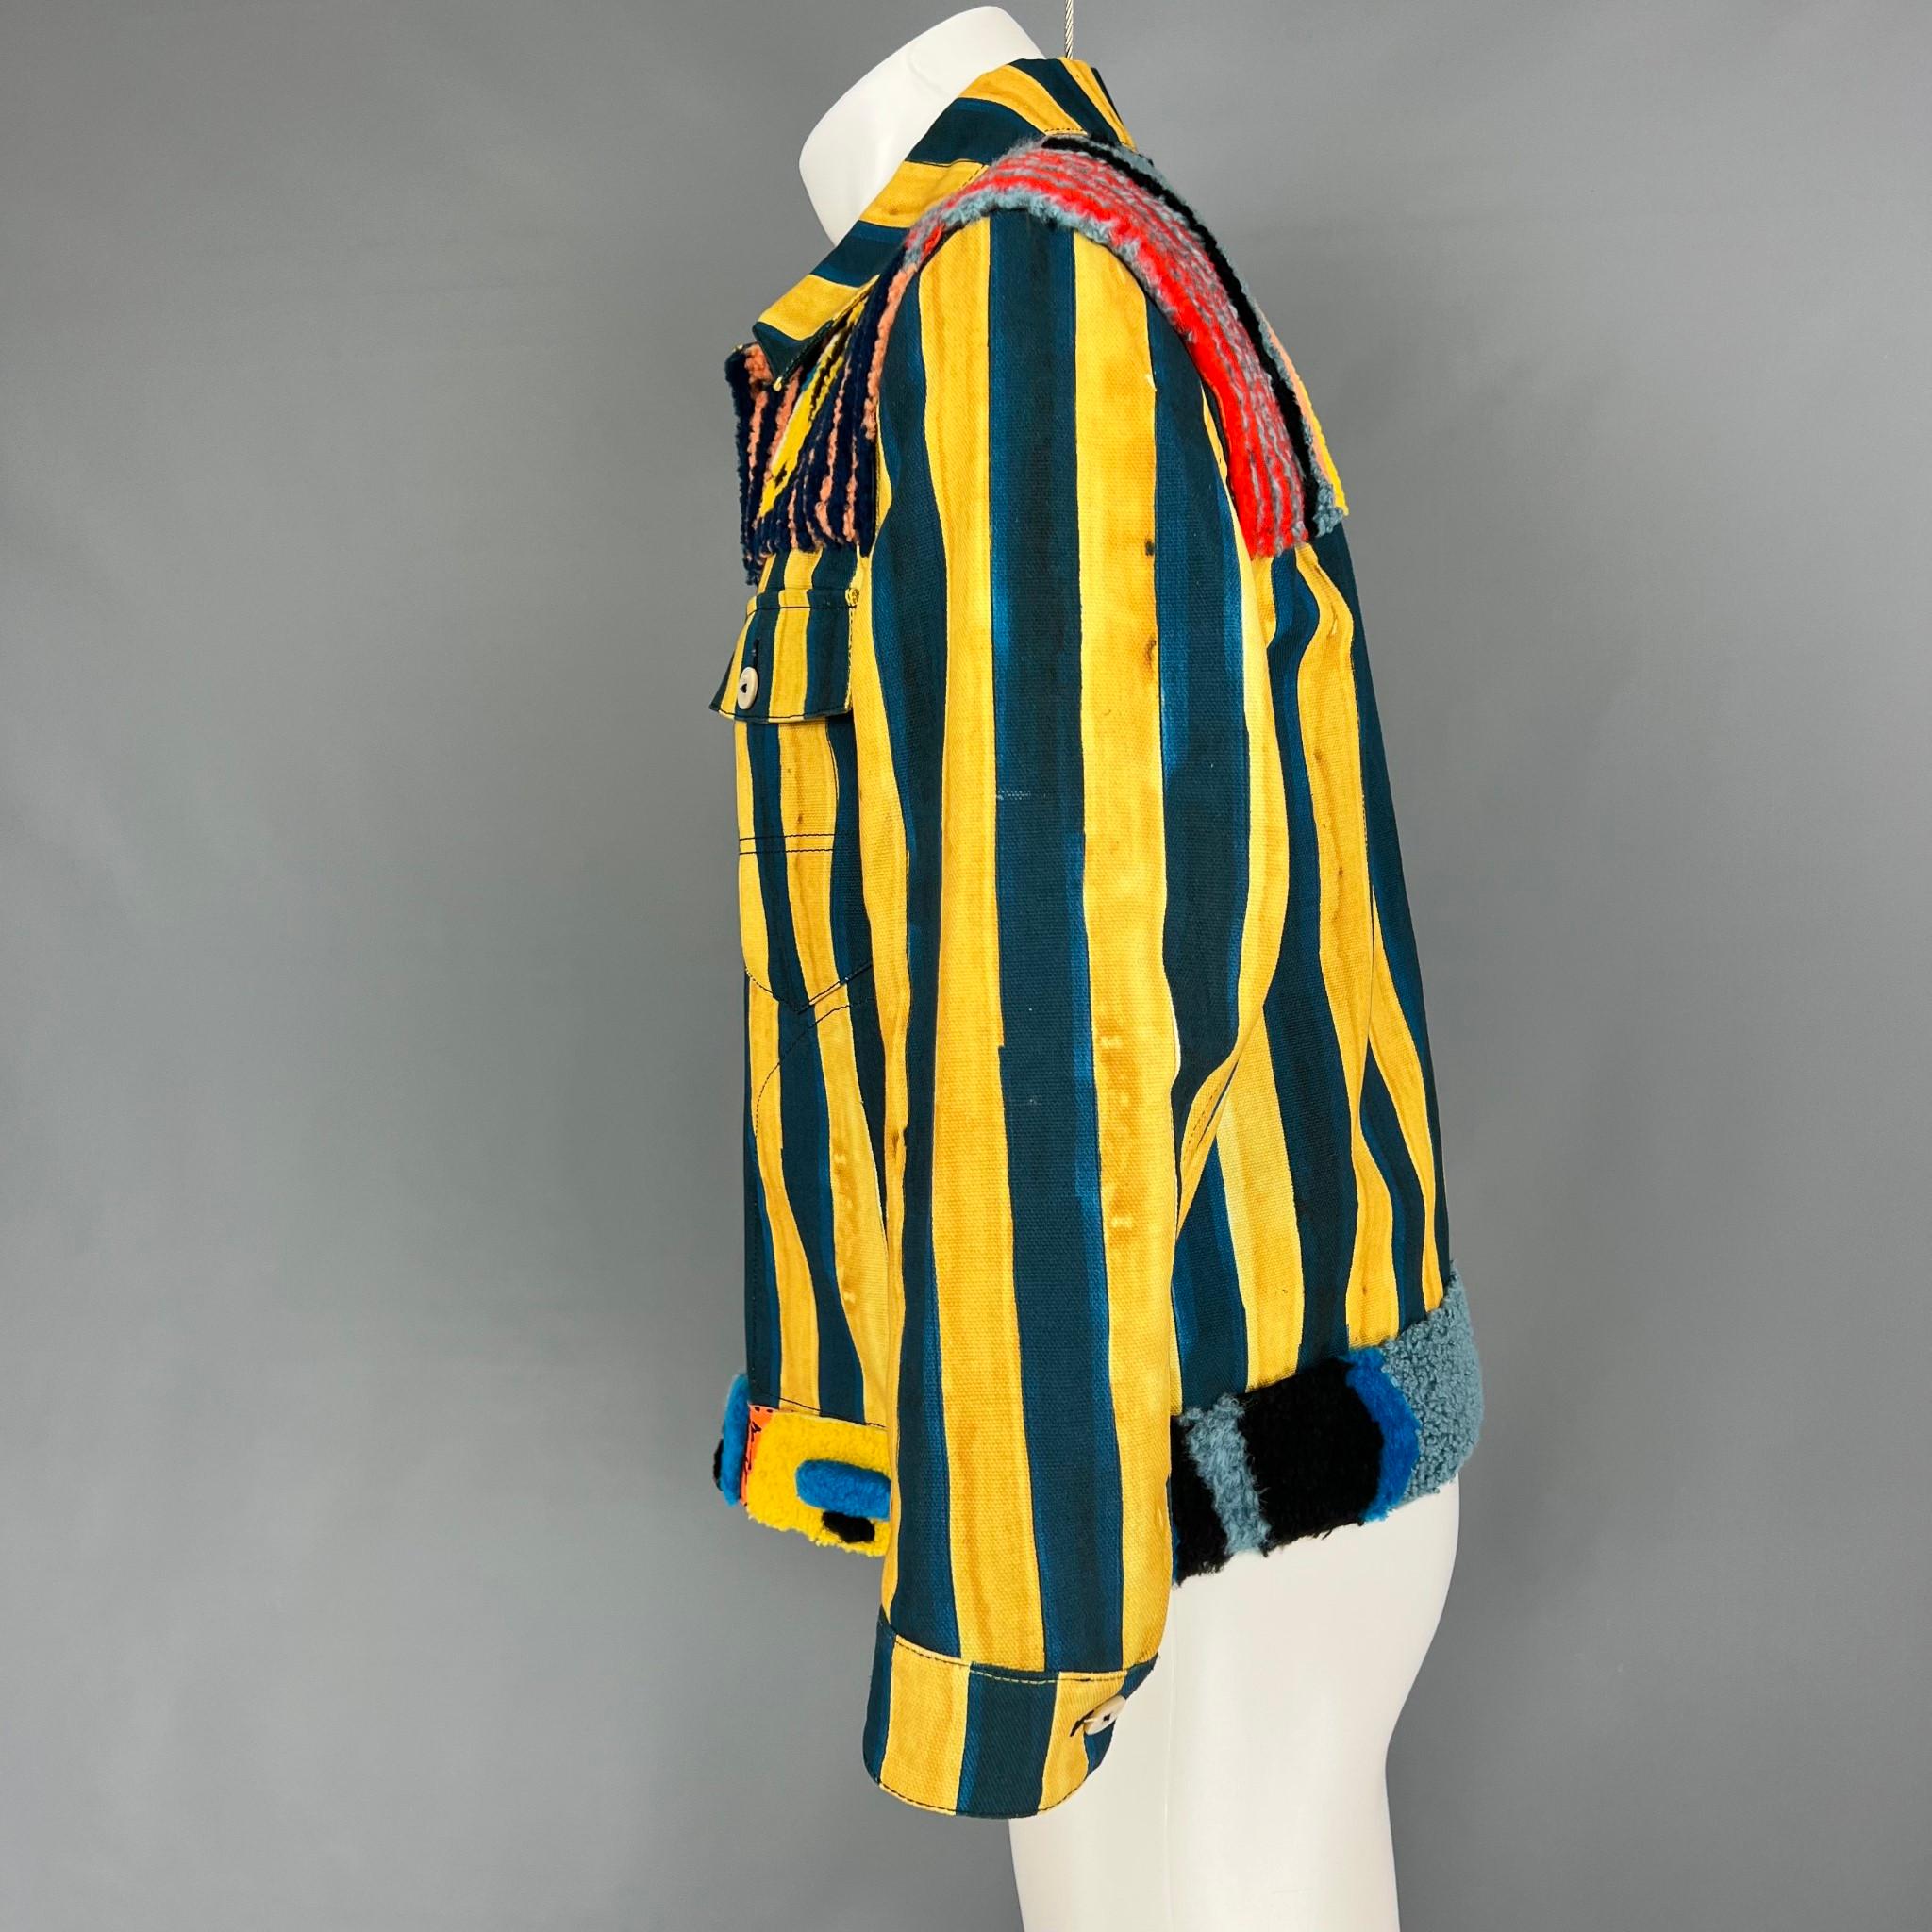 Fendi 'John Booth' artist collaboration whimsical cotton denim trucker Jacket from the Spring 2017 menswear presentation, features a spread collar, front button closure, long sleeves, buttoned cuffs, two chest pockets, a blue and yellow stripe print